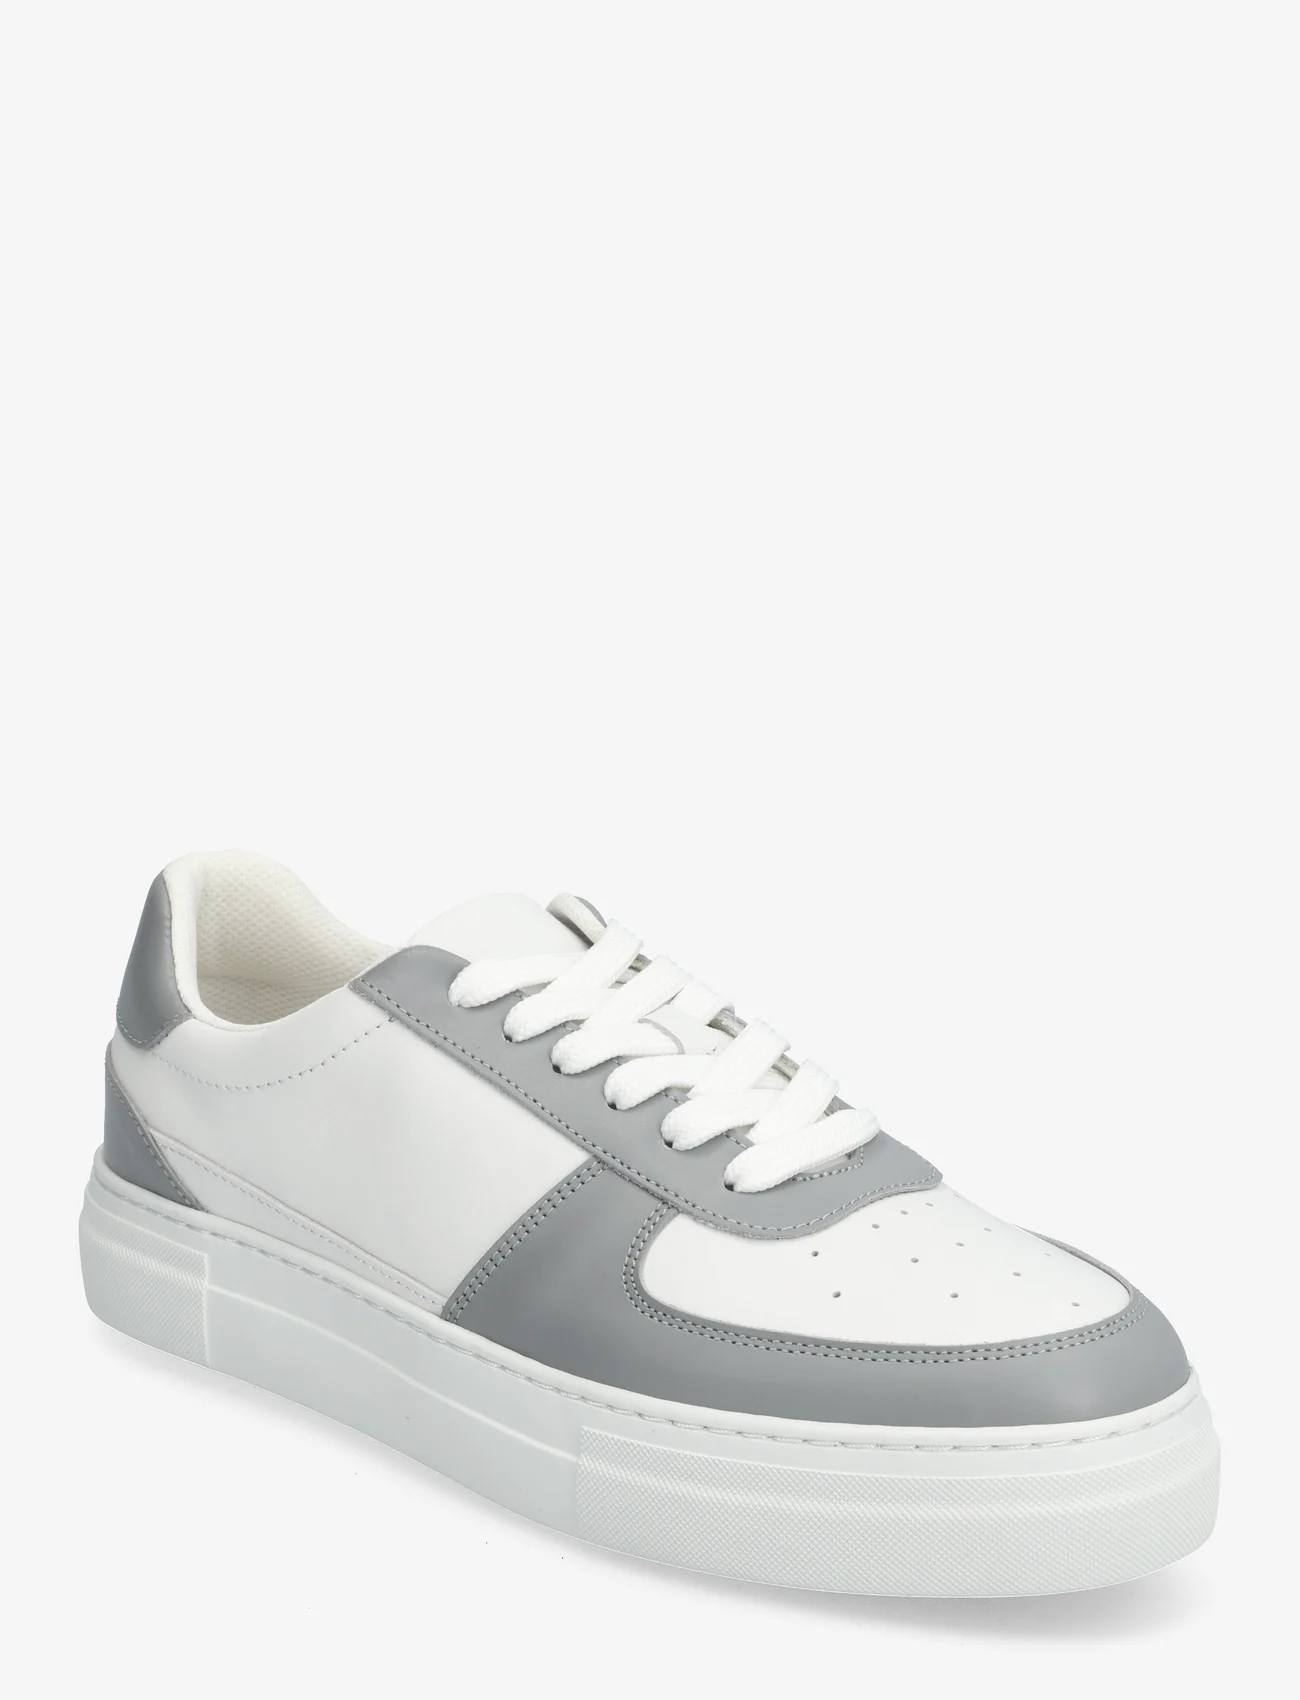 Selected Homme - SLHHARALD LEATHER SNEAKER - lave sneakers - grey - 0